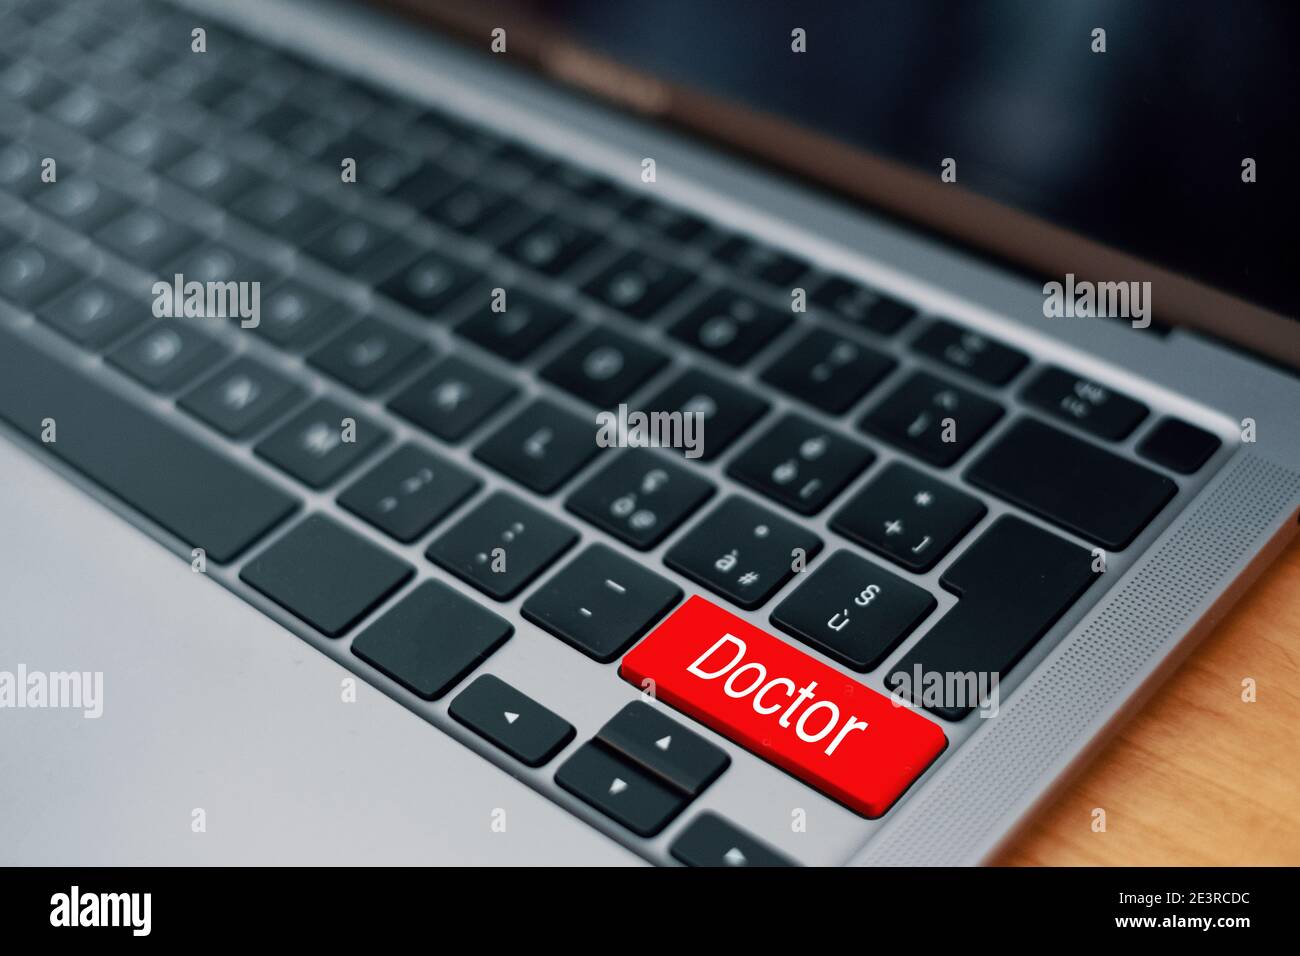 Find a doctor online with the internet on a computer keyboard Stock Photo